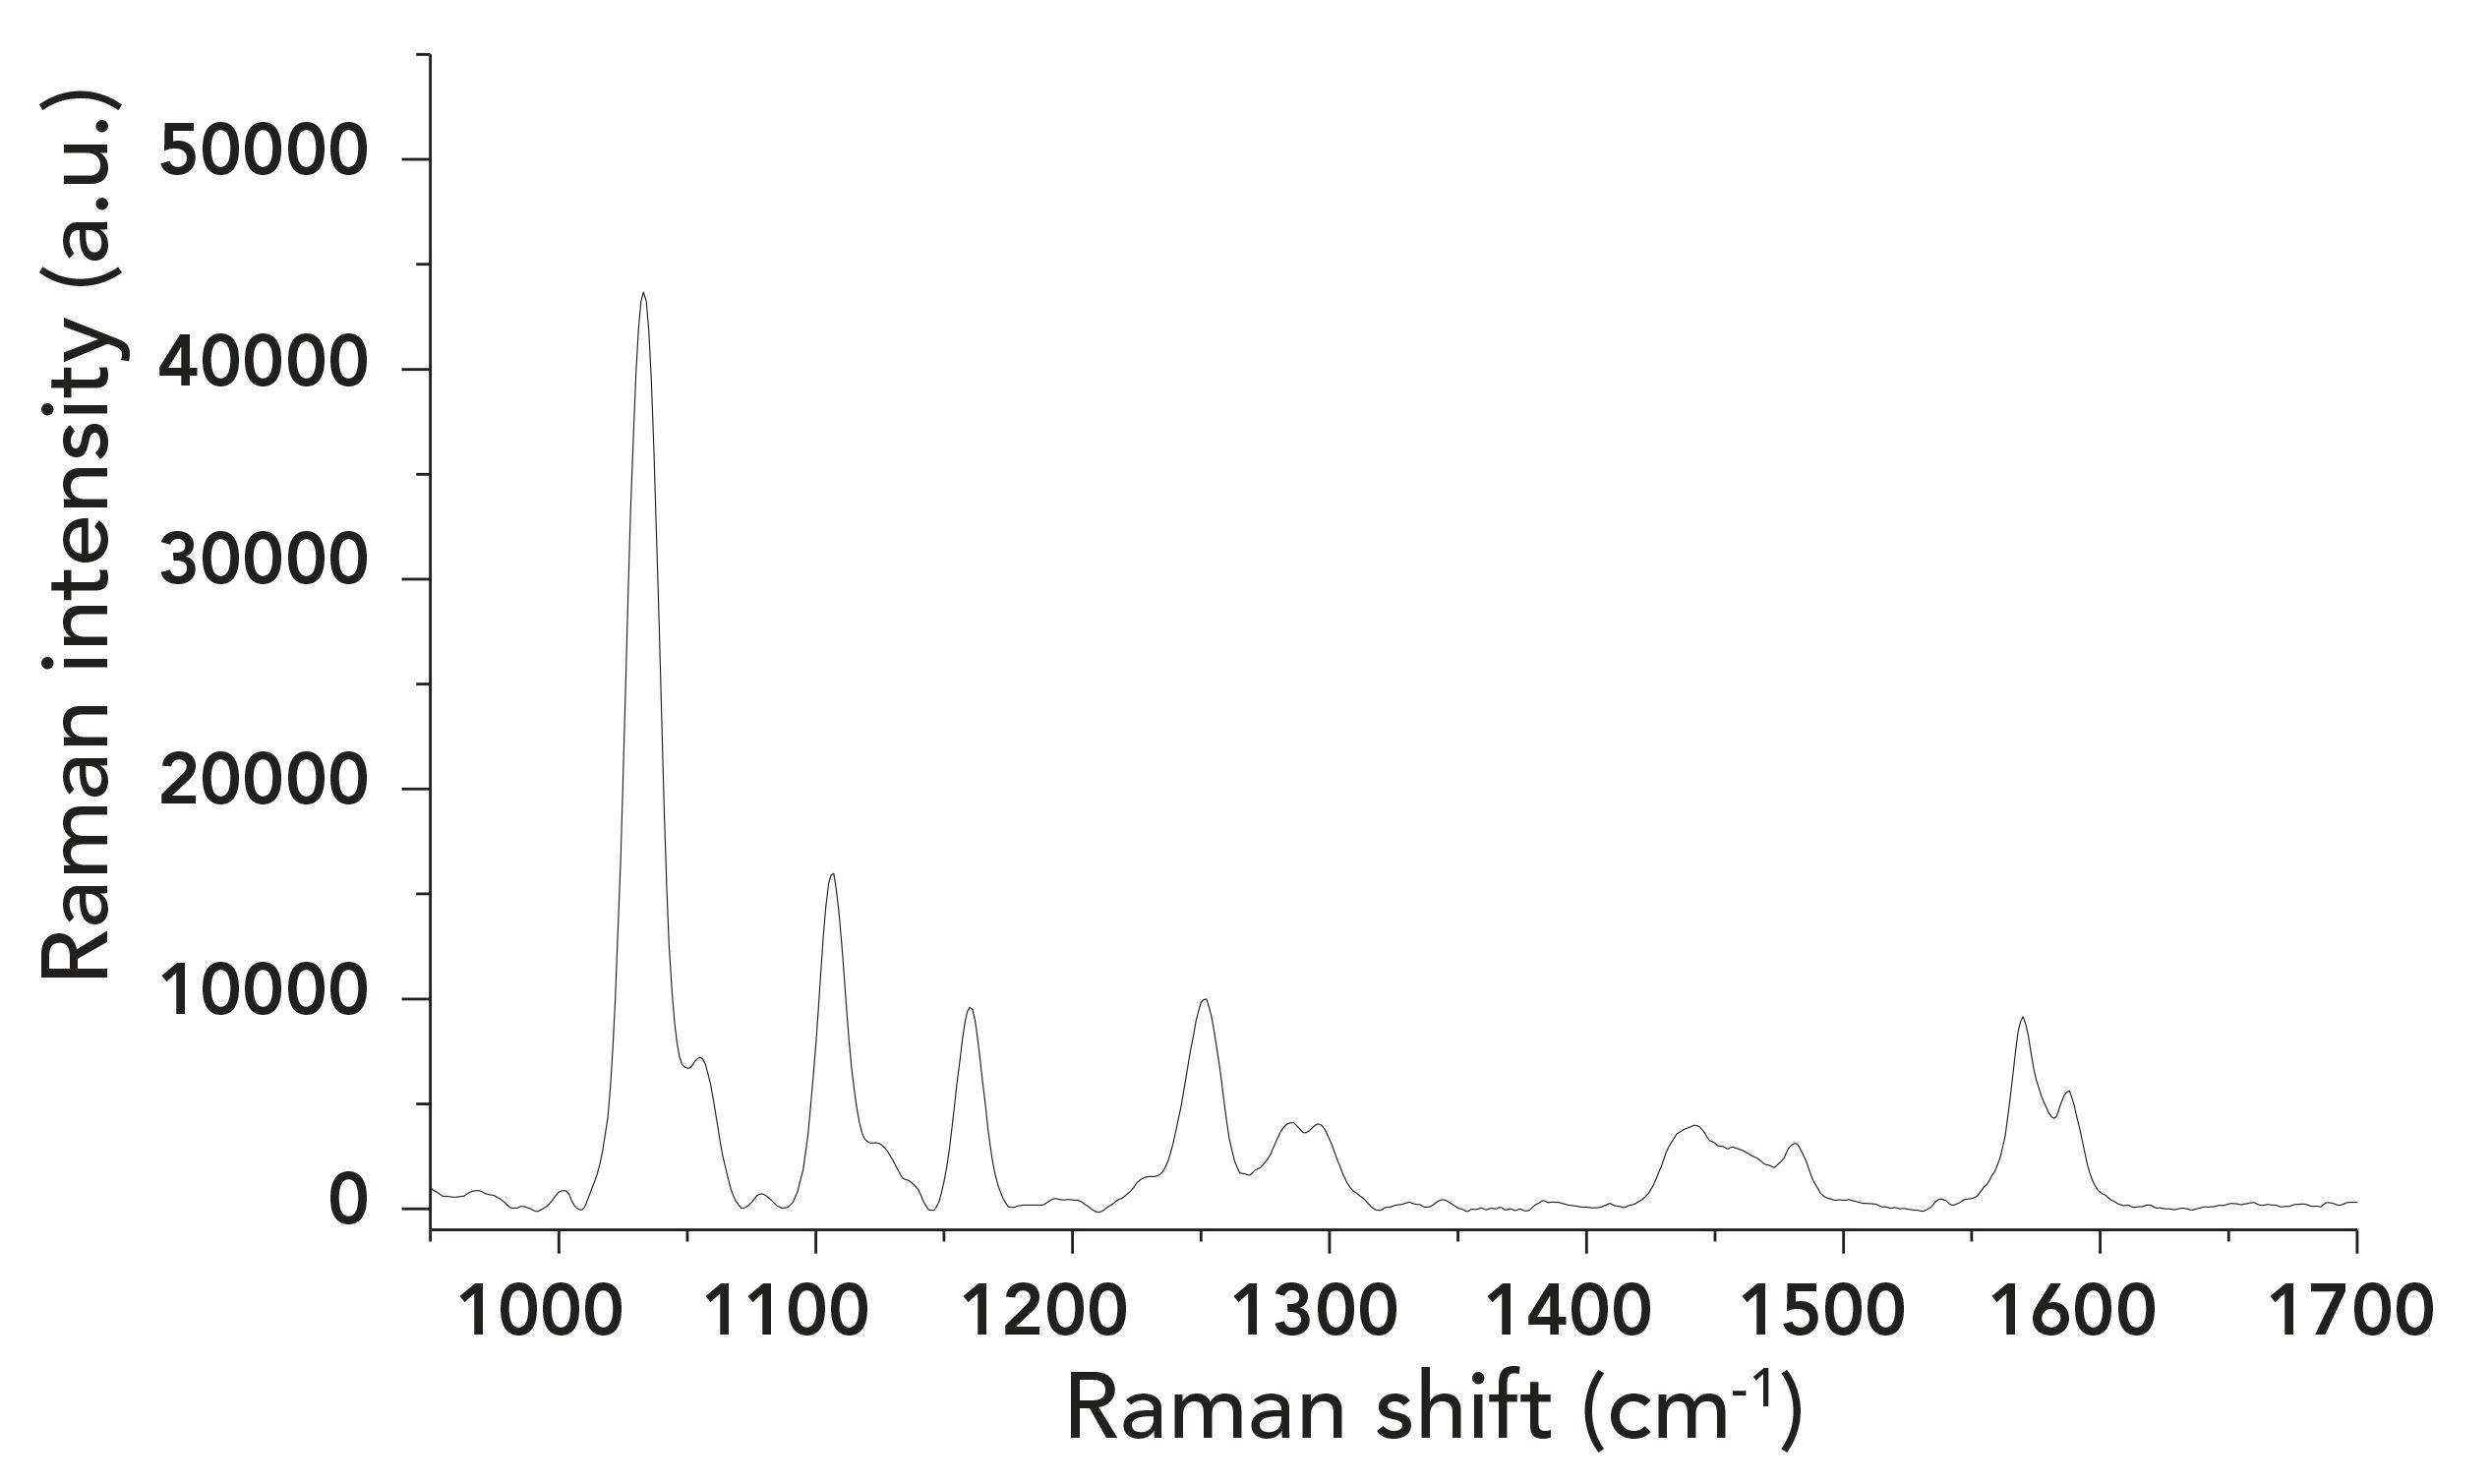 FIGURE 4: SERS spectra of mixture at concentration ratio of 1:1 (1.5 x 10-5 M) with potassium iodide (KI).